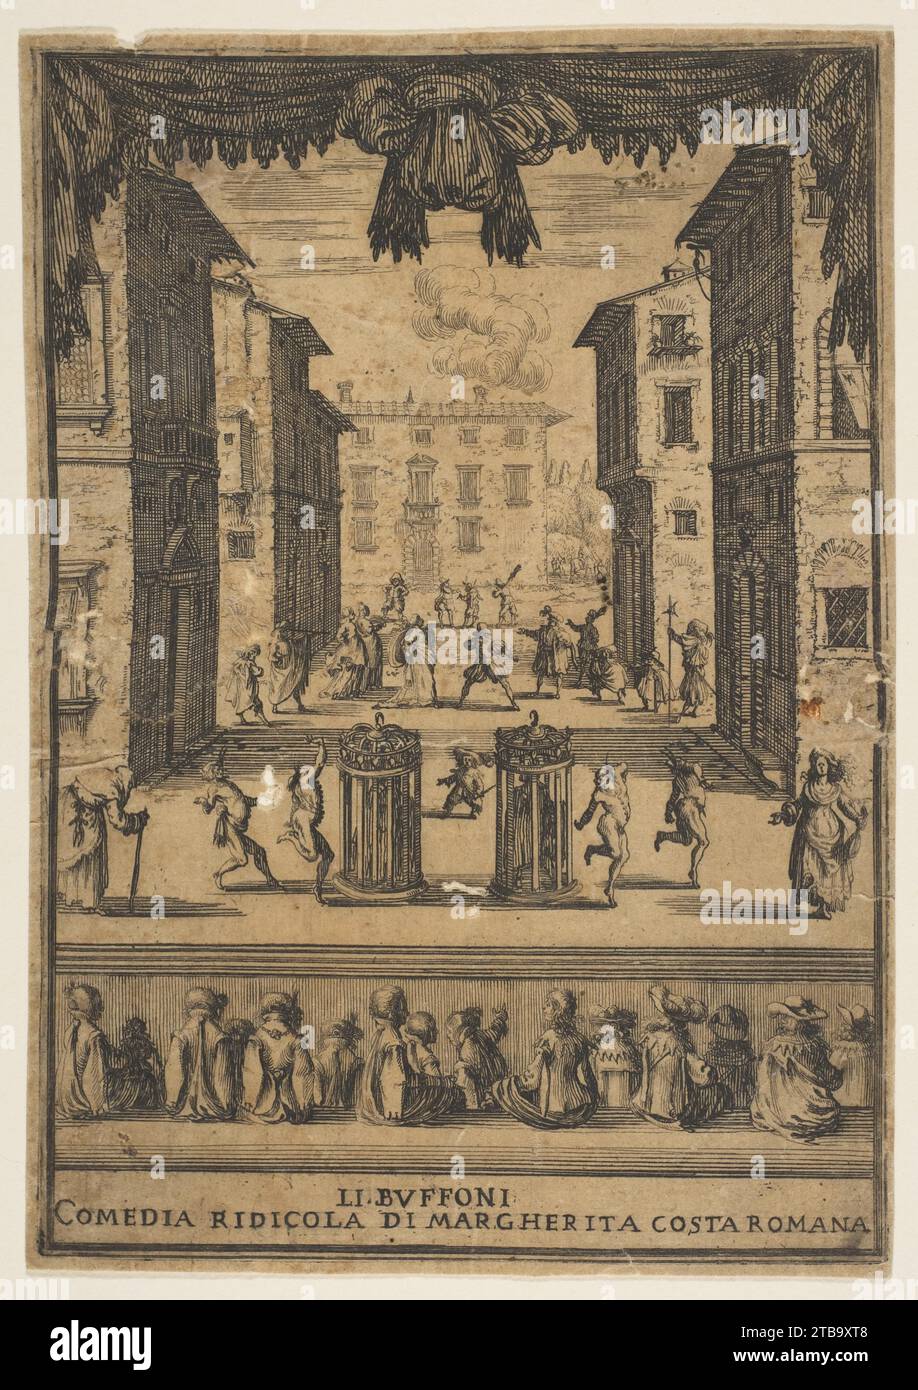 Frontispiece for the comedy 'The Buffoons' (Li Buffoni), a set on stage resembling a public space, various figures dancing around two people in cages in center stage, fifteen spectators below 1959 by Stefano della Bella Stock Photo